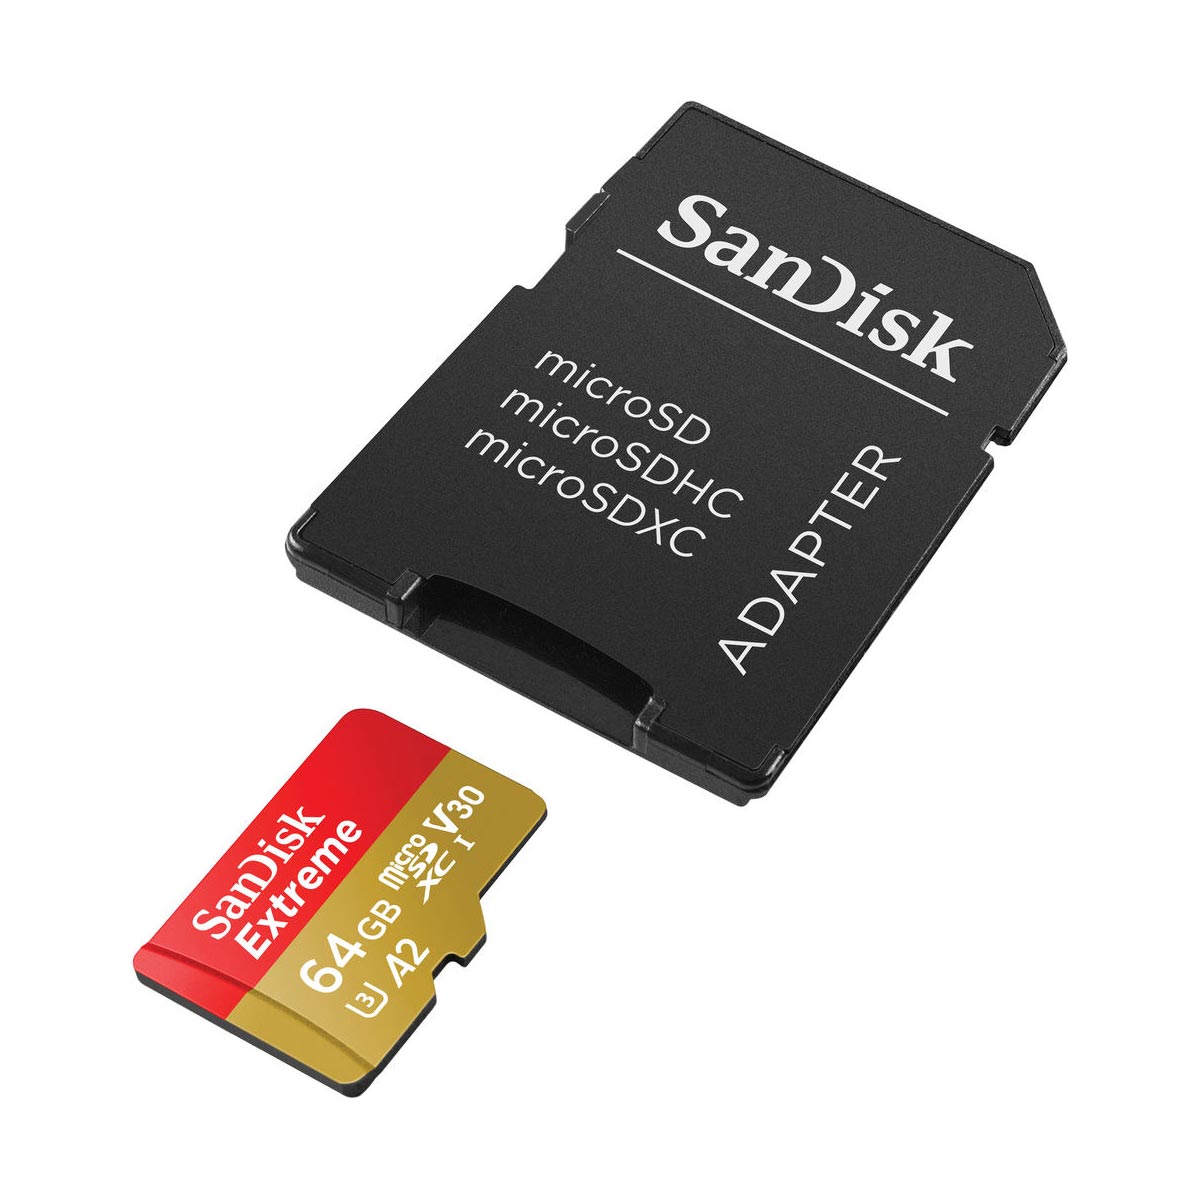 SanDisk 64GB Extreme UHS-I microSDXC 170mb/s Memory Card with SD Adapter